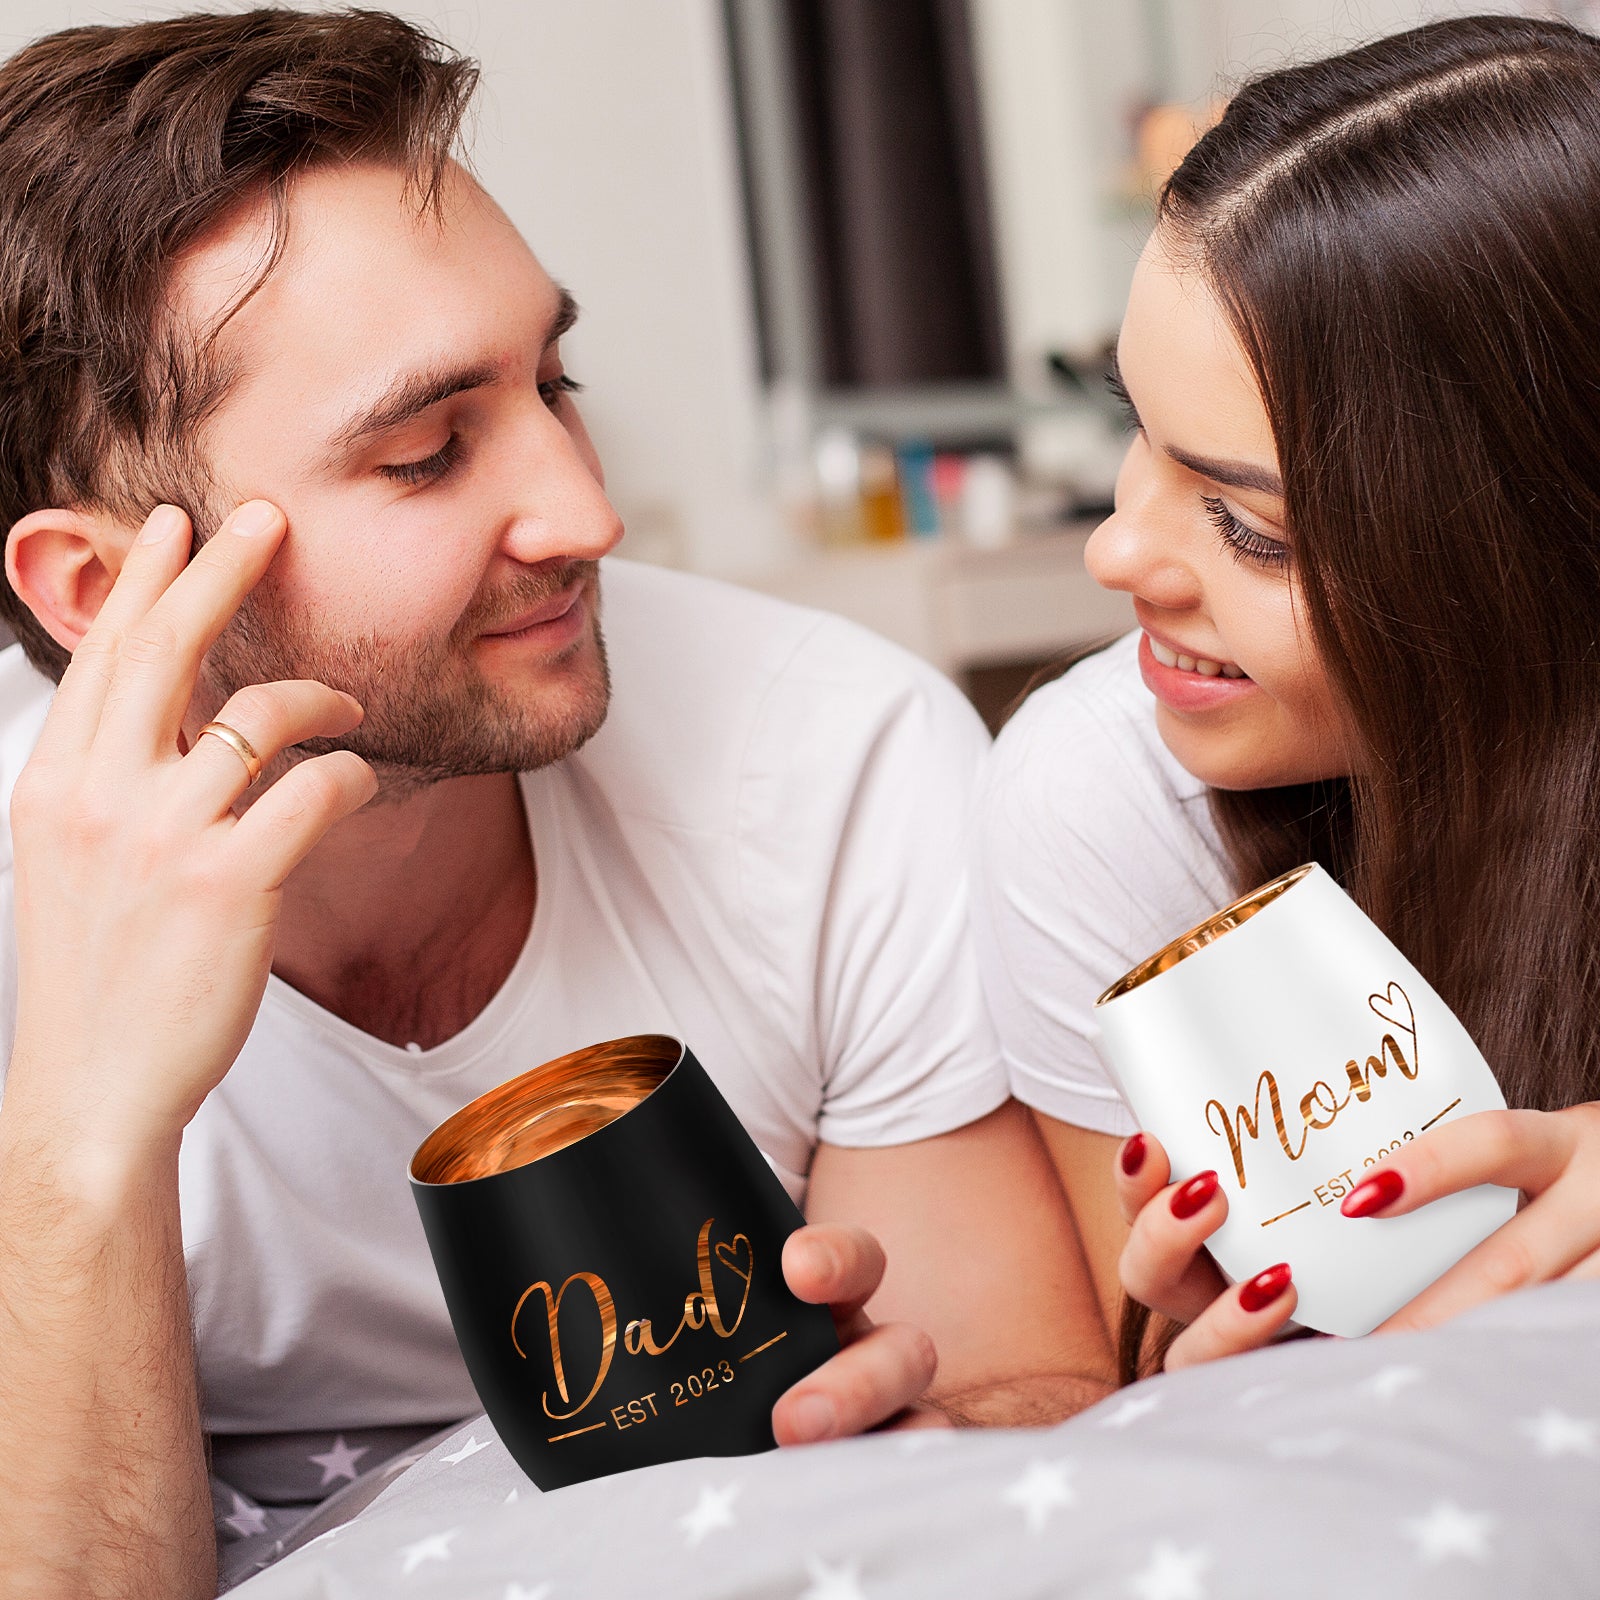 New Parents Gifts For Couples - Pregnancy Gifts For First Time